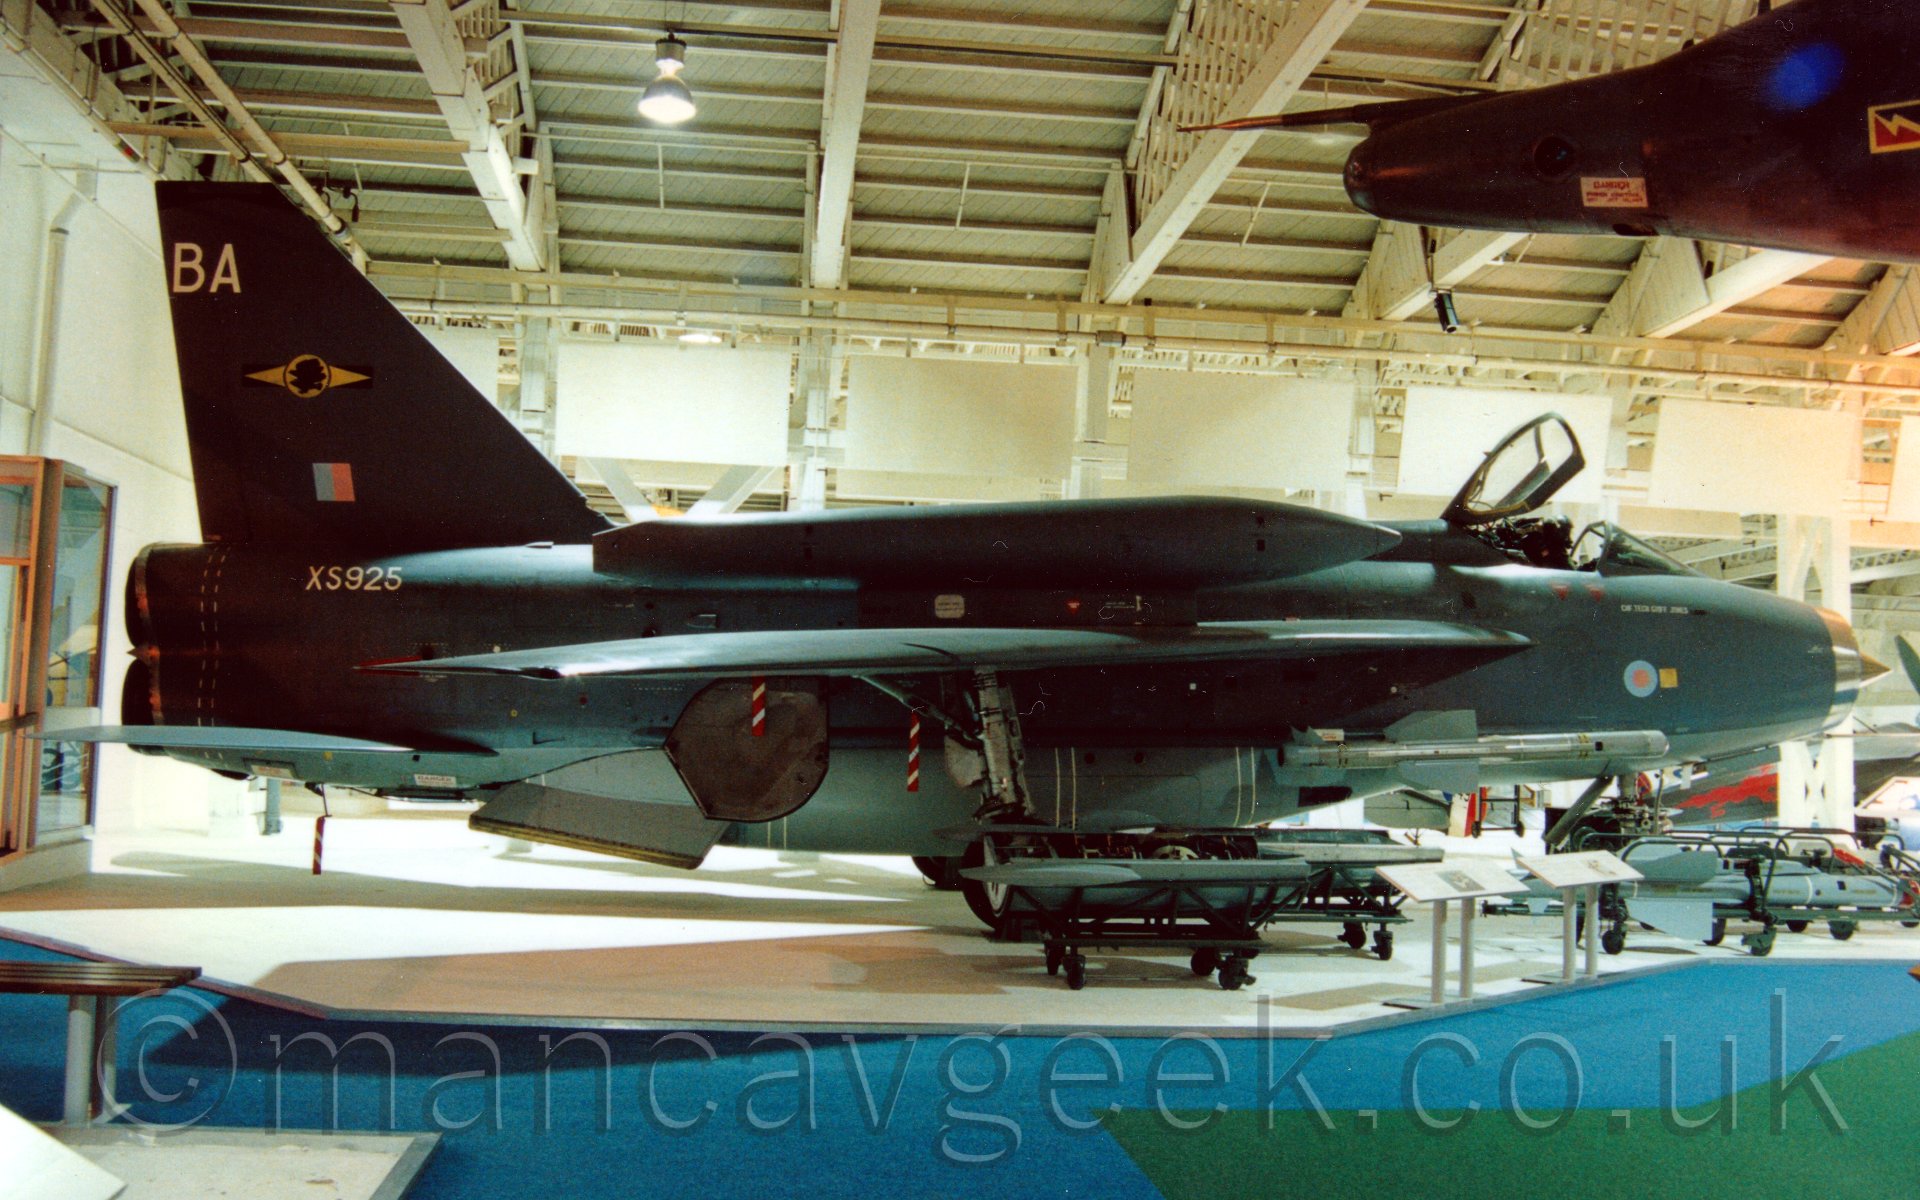 Side view of a single-seat twin engined jet fighter aircraft on display in a museum. The plane has a grey body, with a silver nose cone, with an open cockpit canopy. The plane has a large fuel tank mounted over the wing. It carries the serial "XS925" in whiute on the upper rear fuselage, has a small blue and red square flag and large letters "BA" on the tail, and a small blue and red roundel on the nose. The nosecone of another plane is just visible in the top right corner. Behind are the white walls and ceiling of the museum